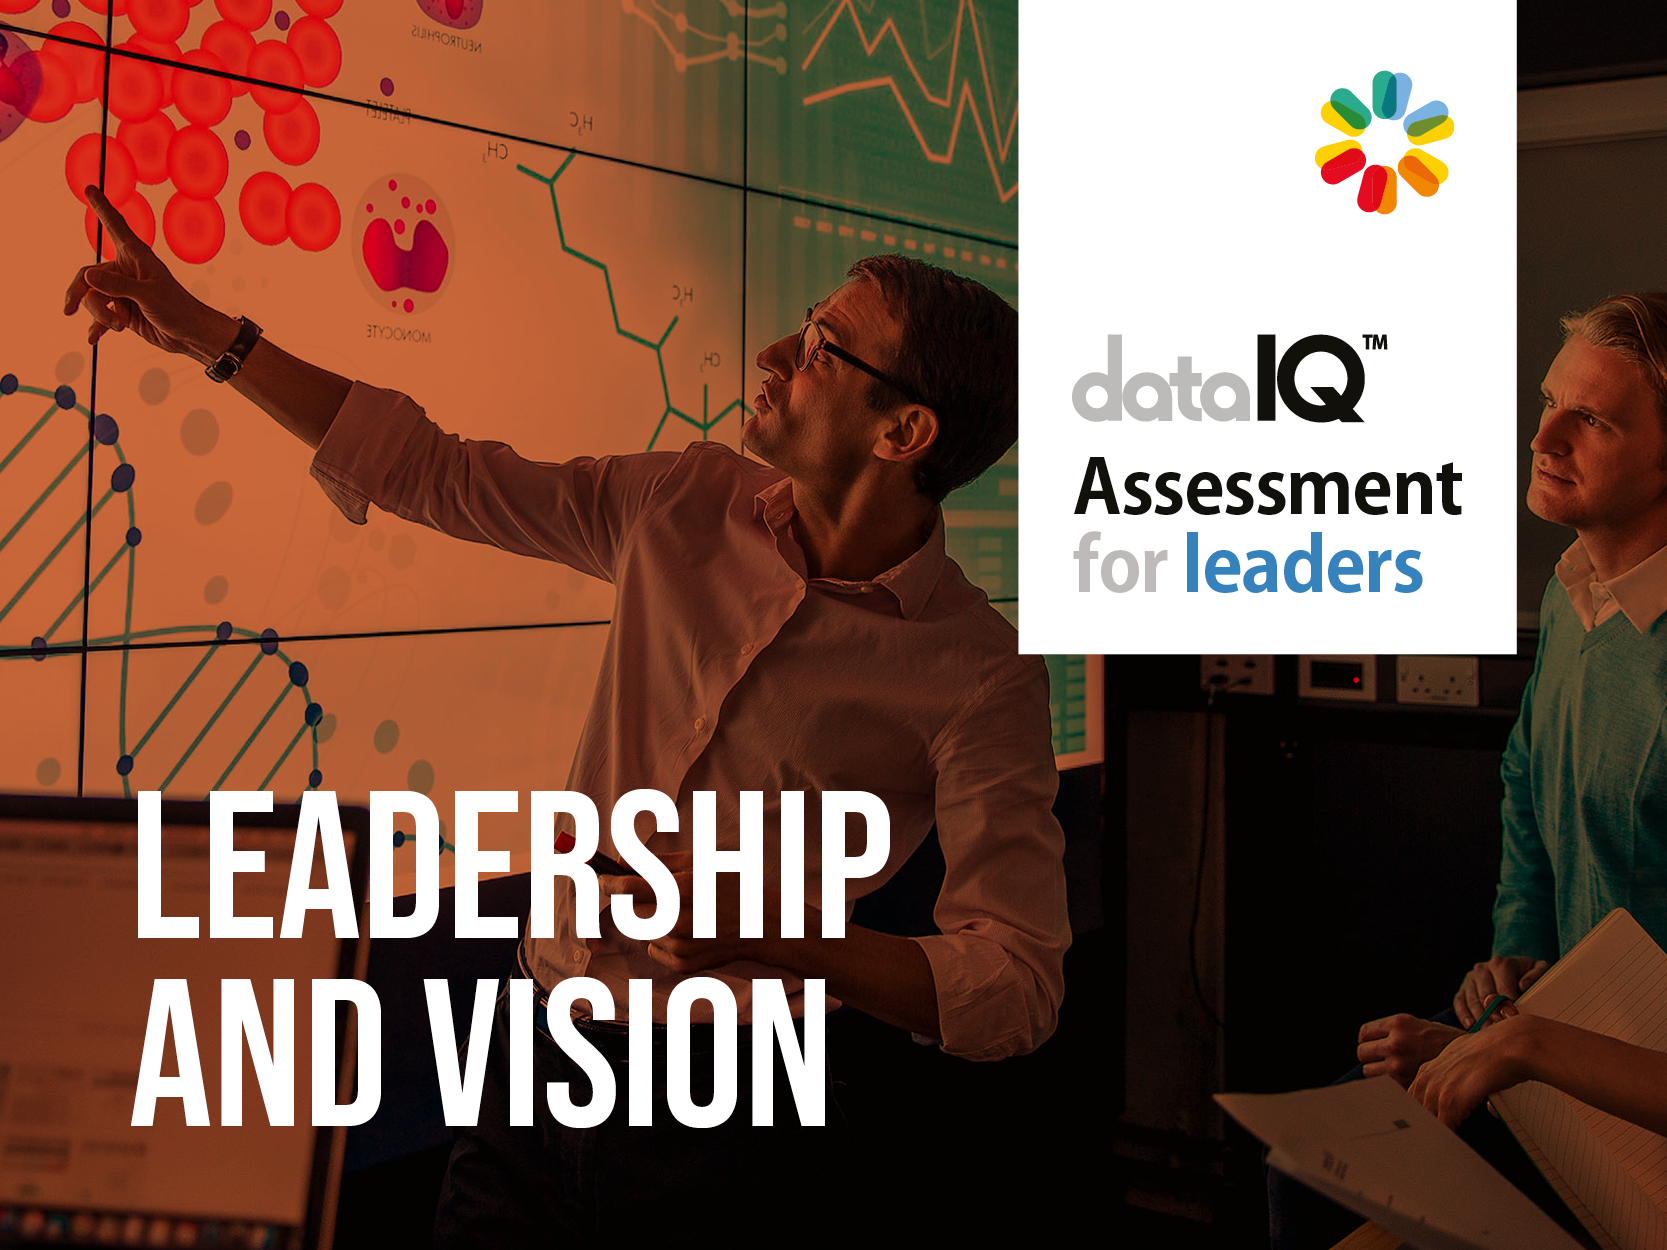 Leadership cover image